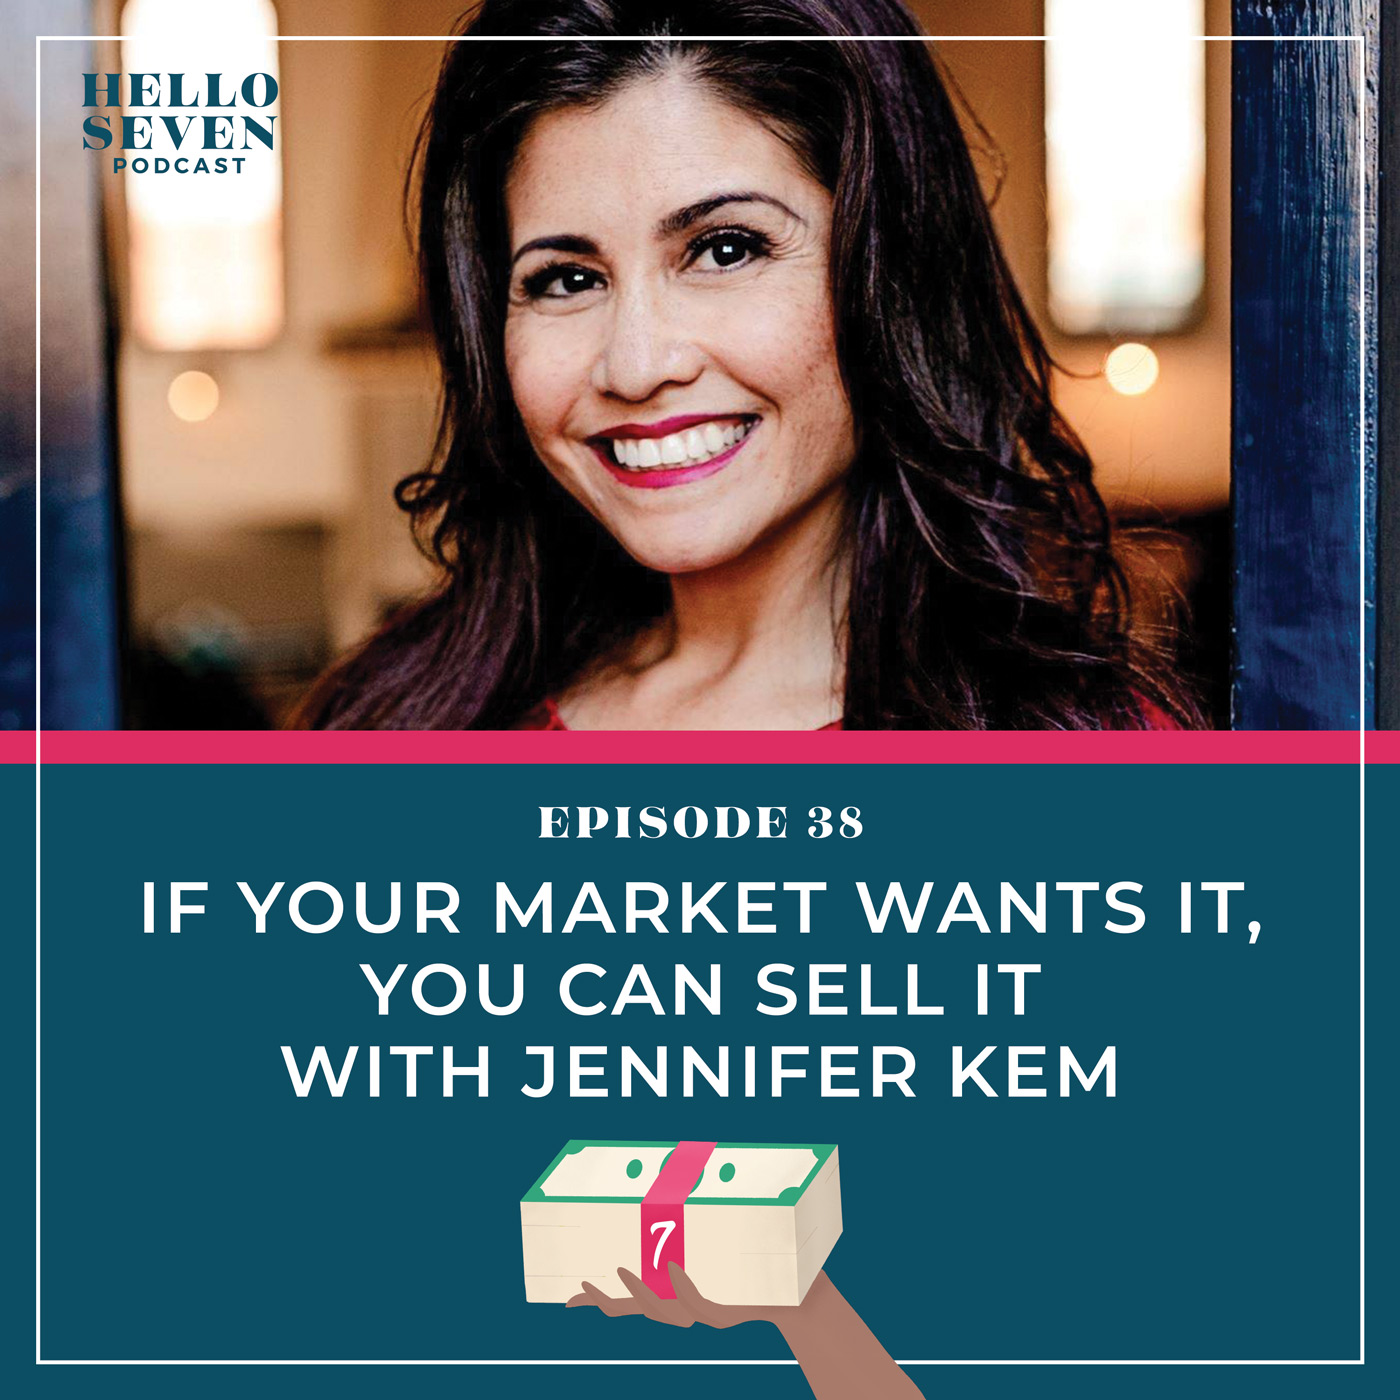 If Your Market Wants It, You can Sell It with Jennifer Kem